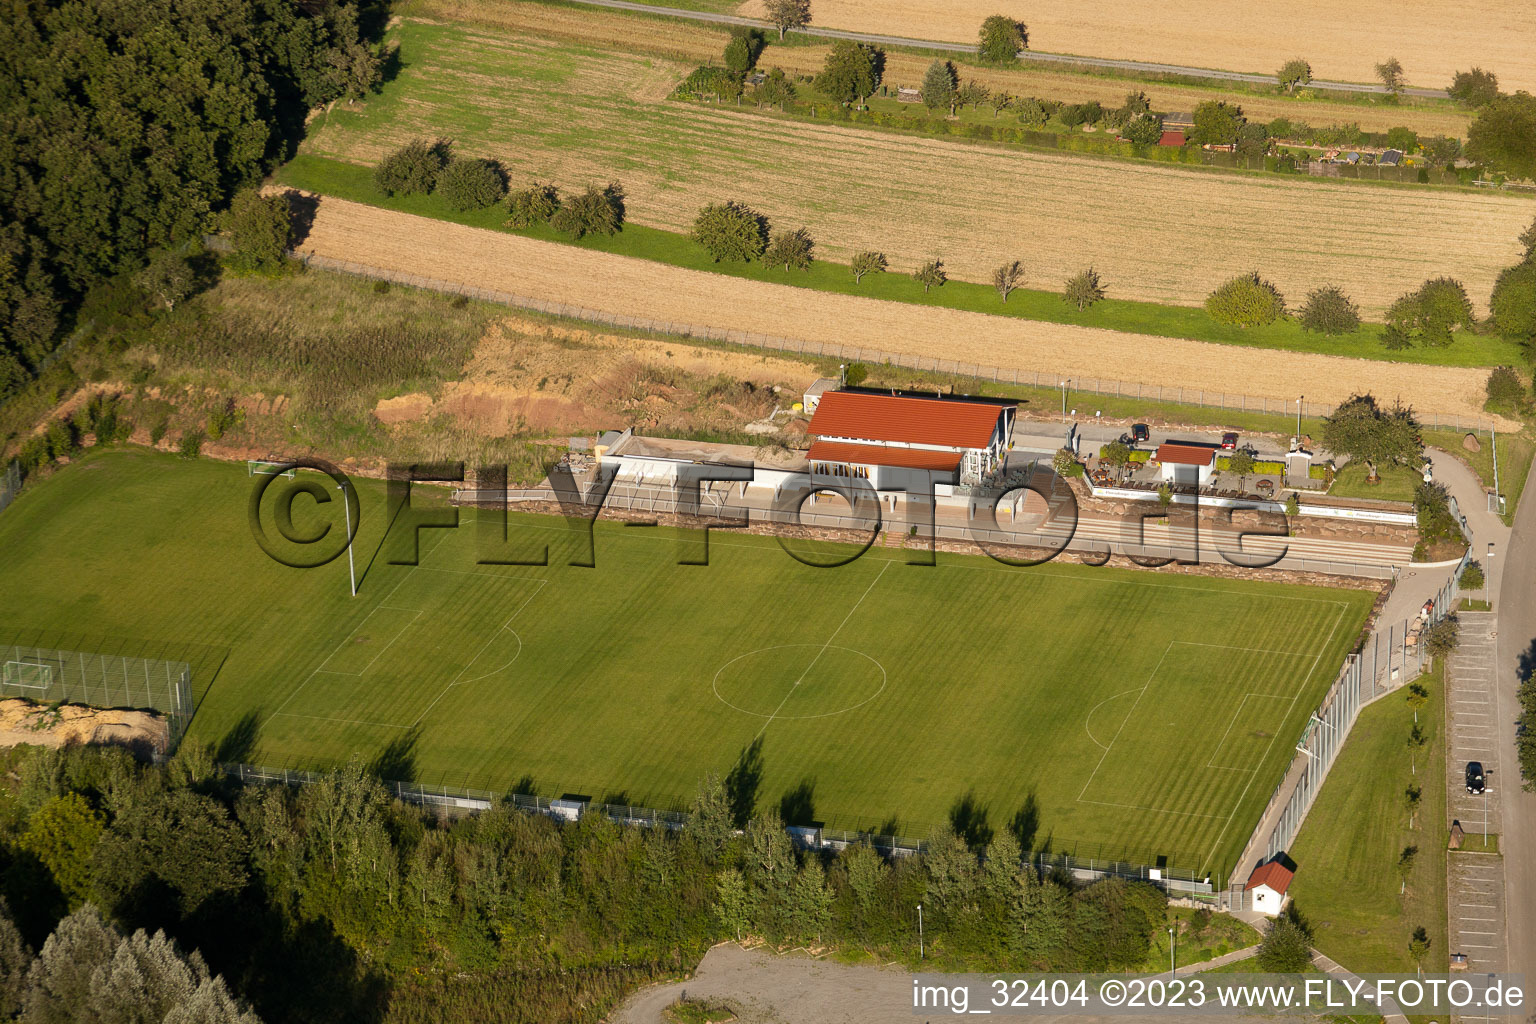 Oblique view of Pneuhage Stadium in the district Auerbach in Karlsbad in the state Baden-Wuerttemberg, Germany